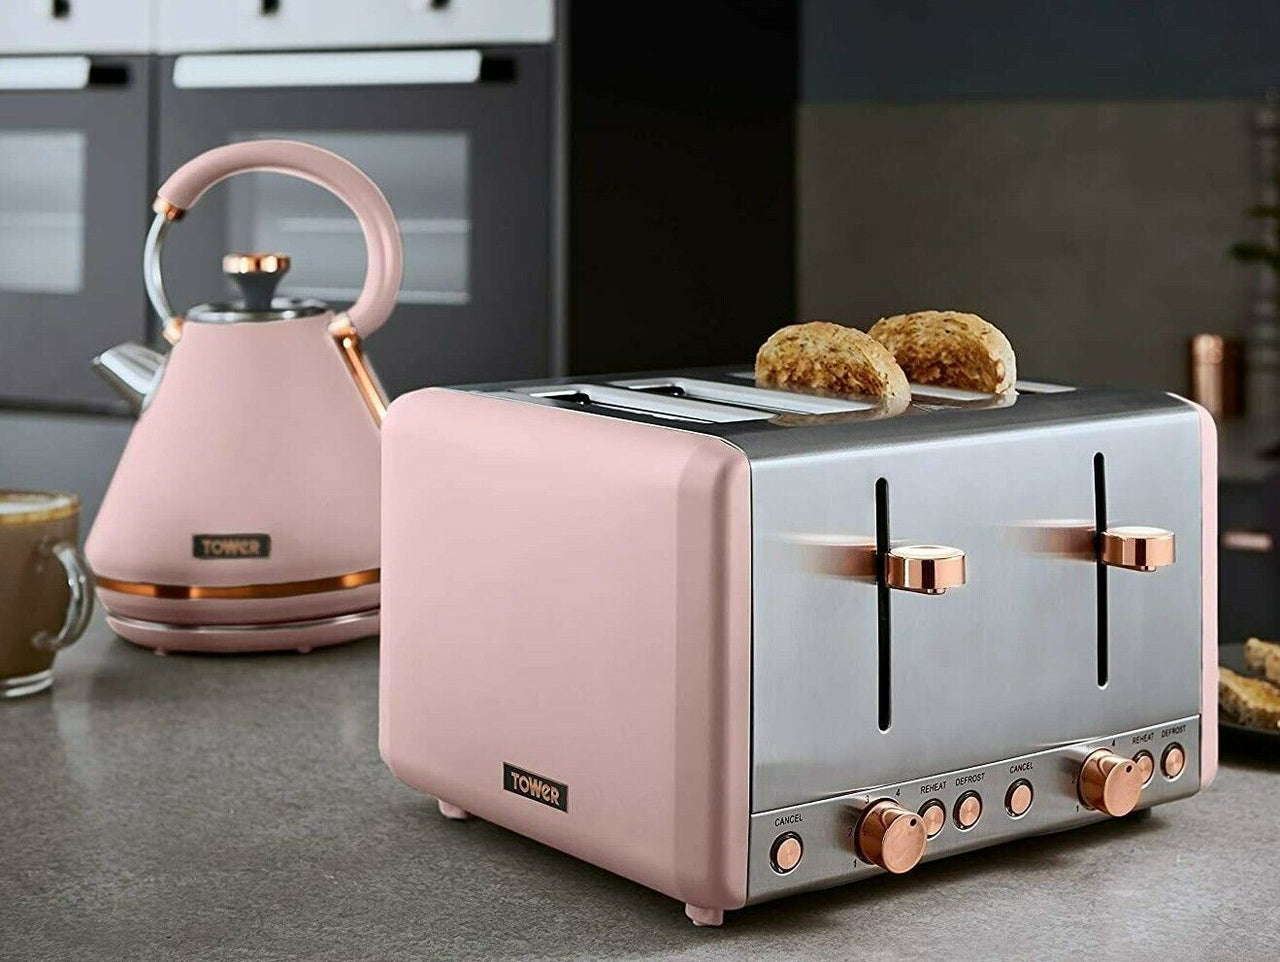 TOWER Cavaletto 3KW 1.7L Pyramid Kettle & 4 Slice 1800W Toaster in Marshmallow Pink & Rose Gold